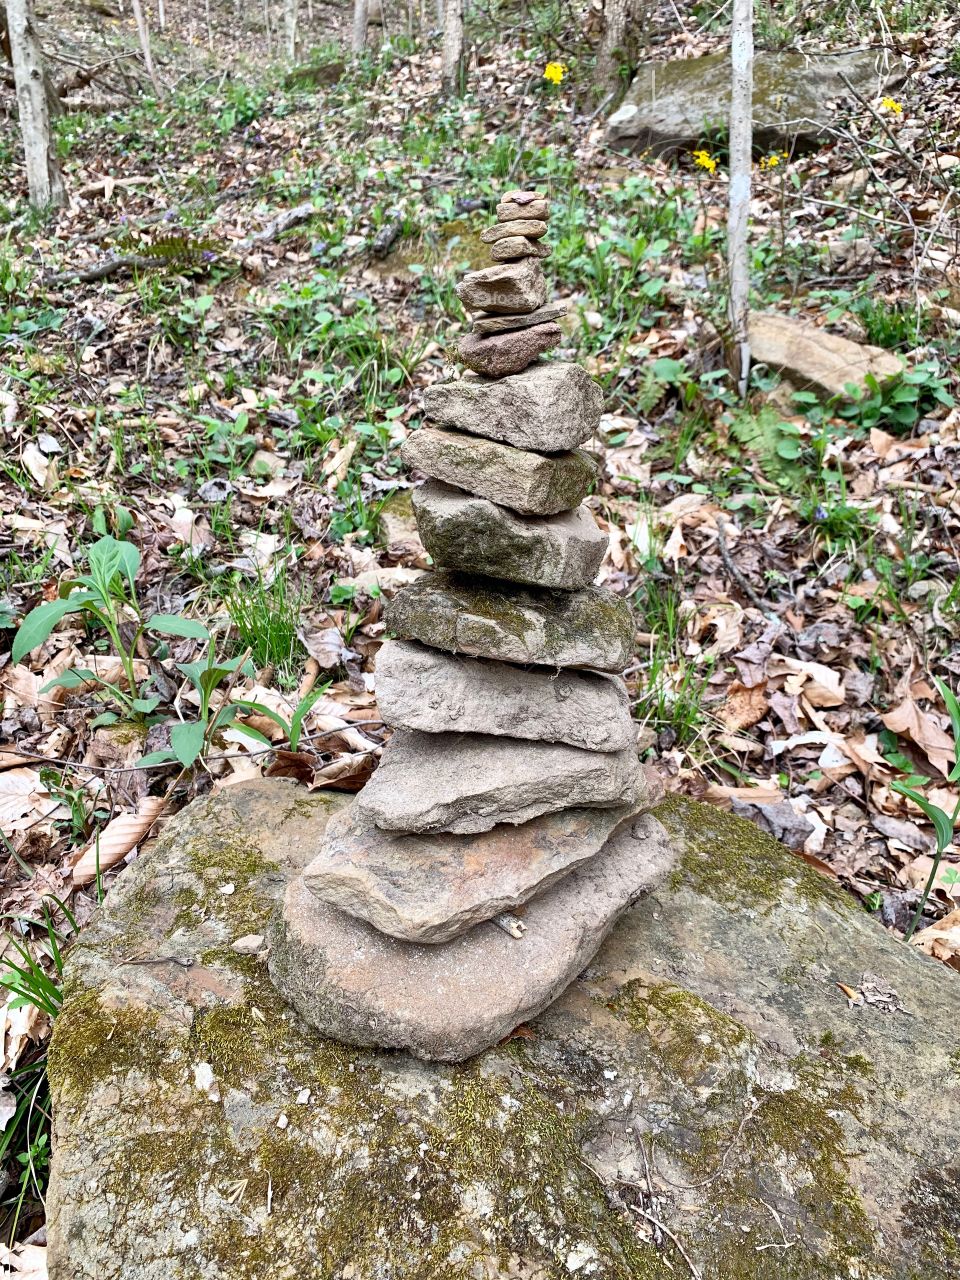 Stacked rocks found in Appalachia nature